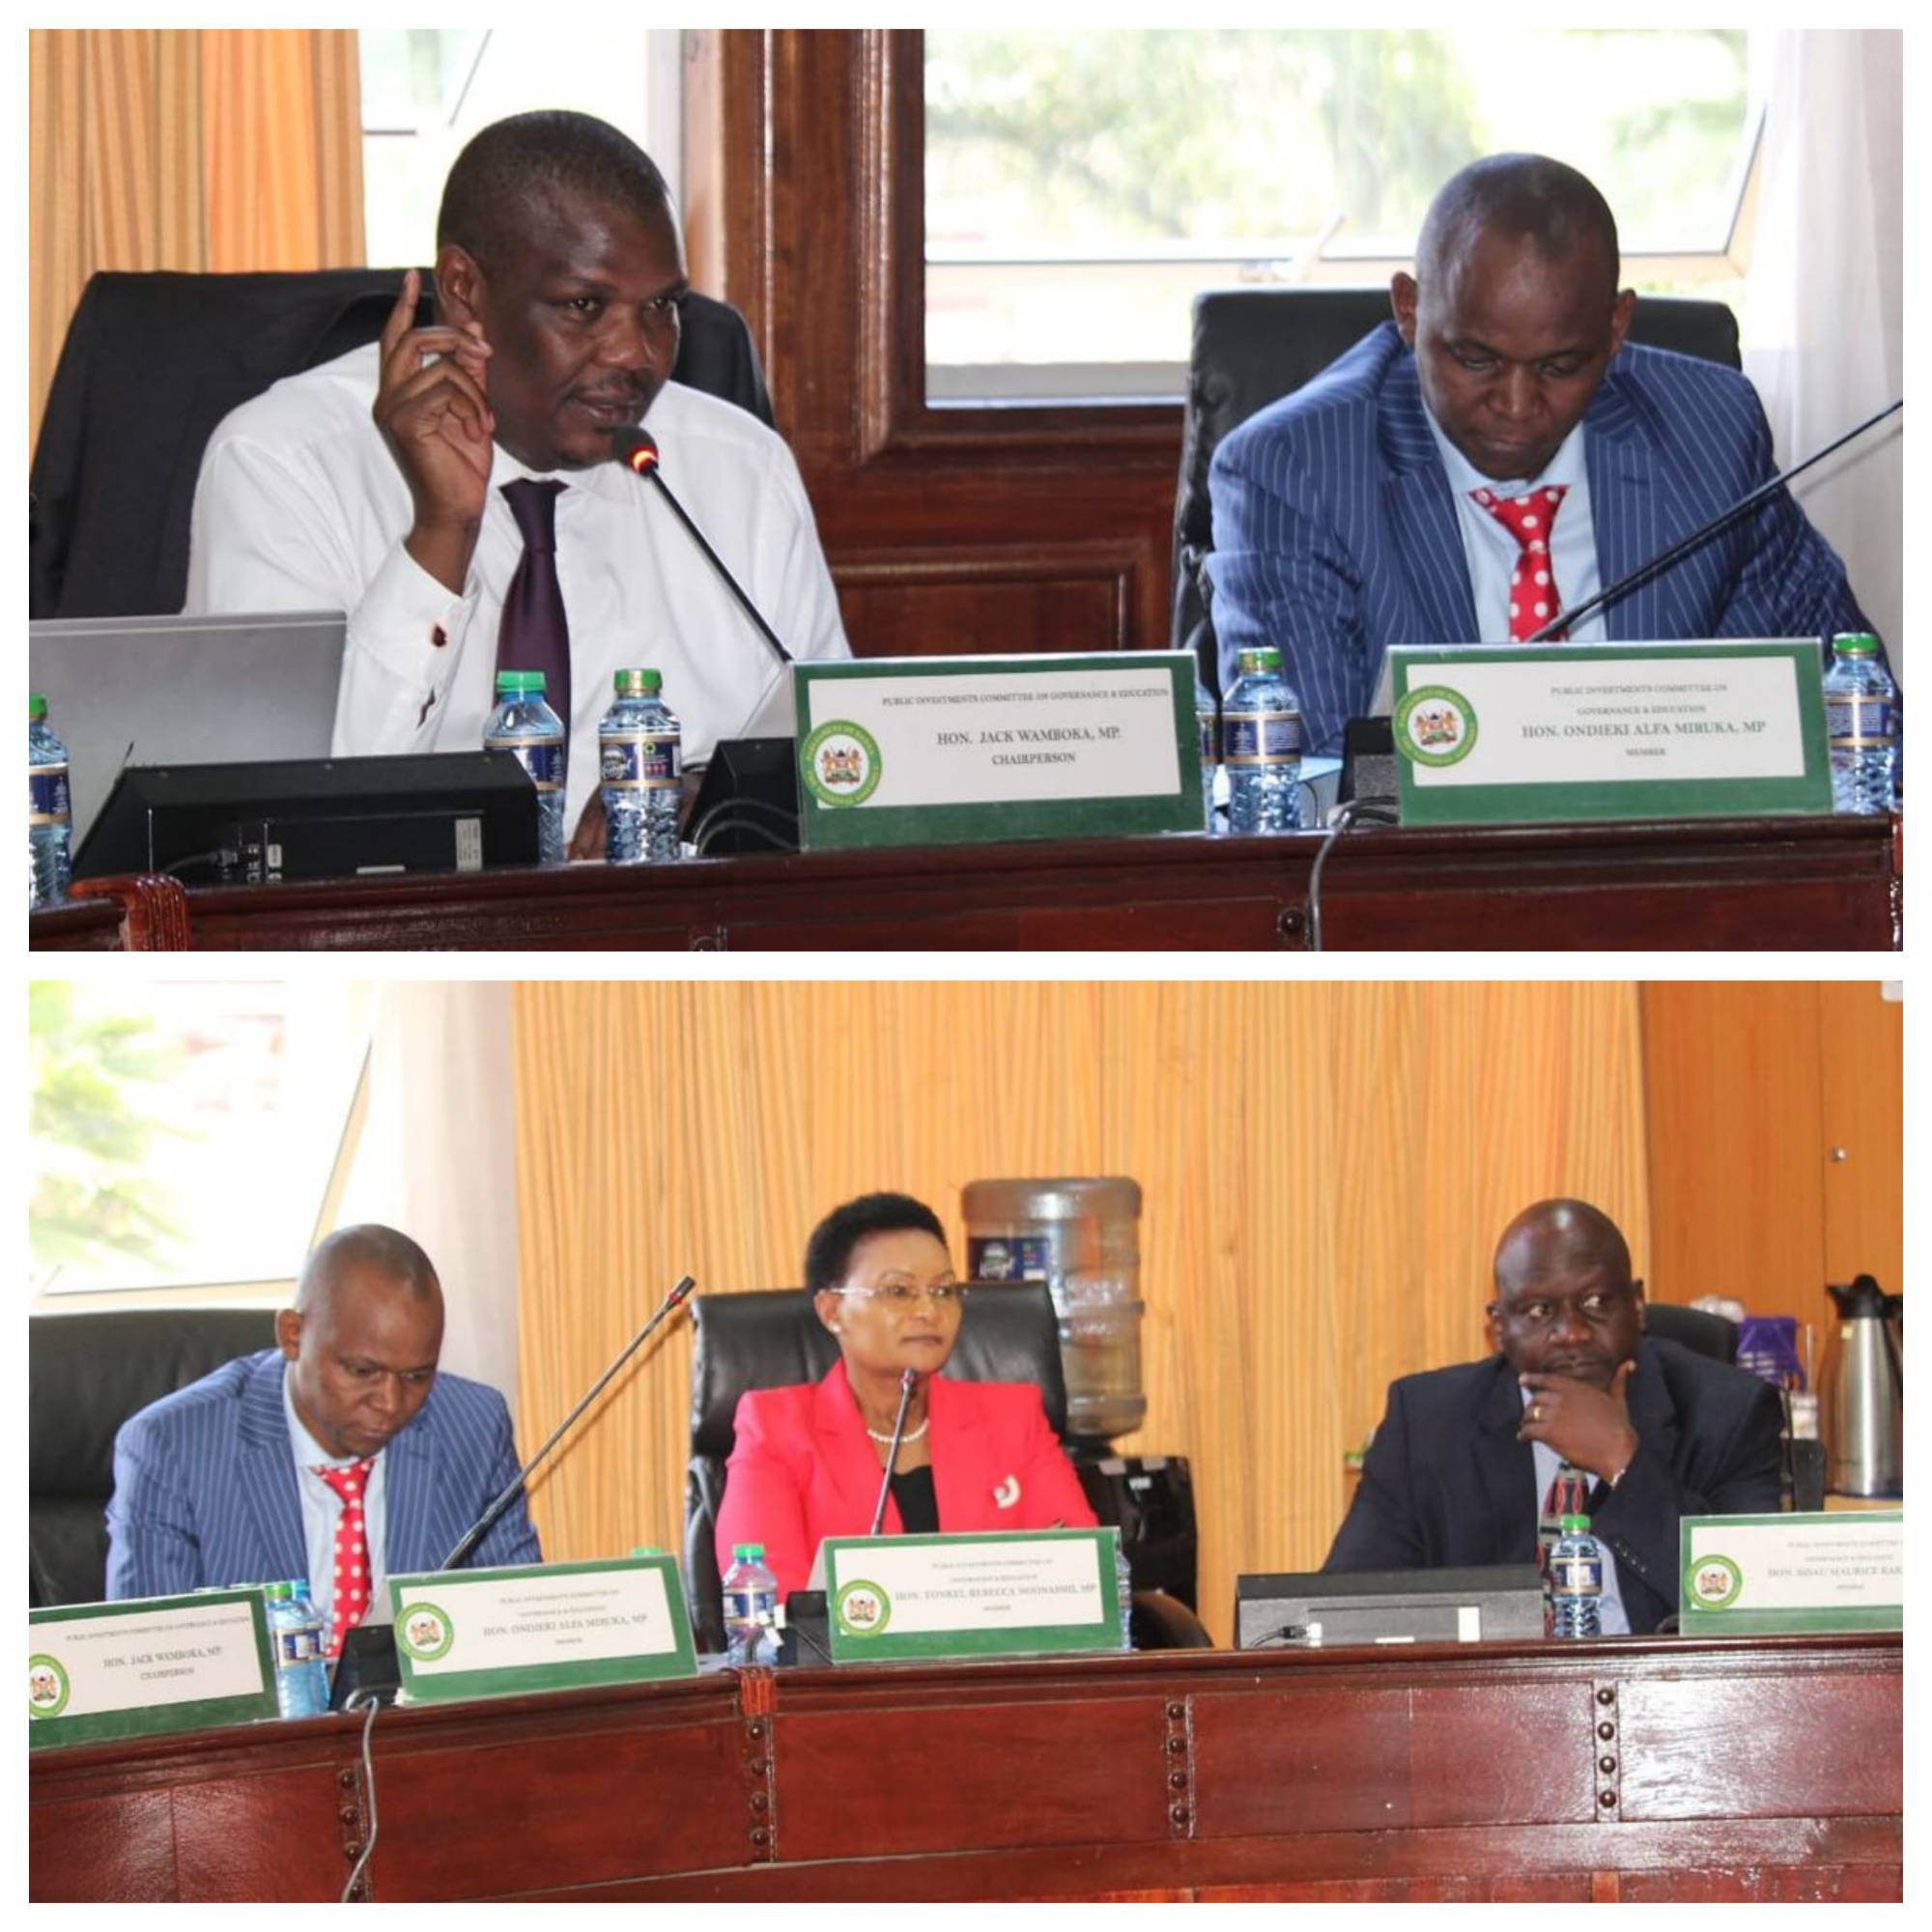 PUBLIC INVESTMENTS COMMITTEE ON GOVERNANCE AND EDUCATION MEETS KICD AND UNES OVER AUDIT QUERIES